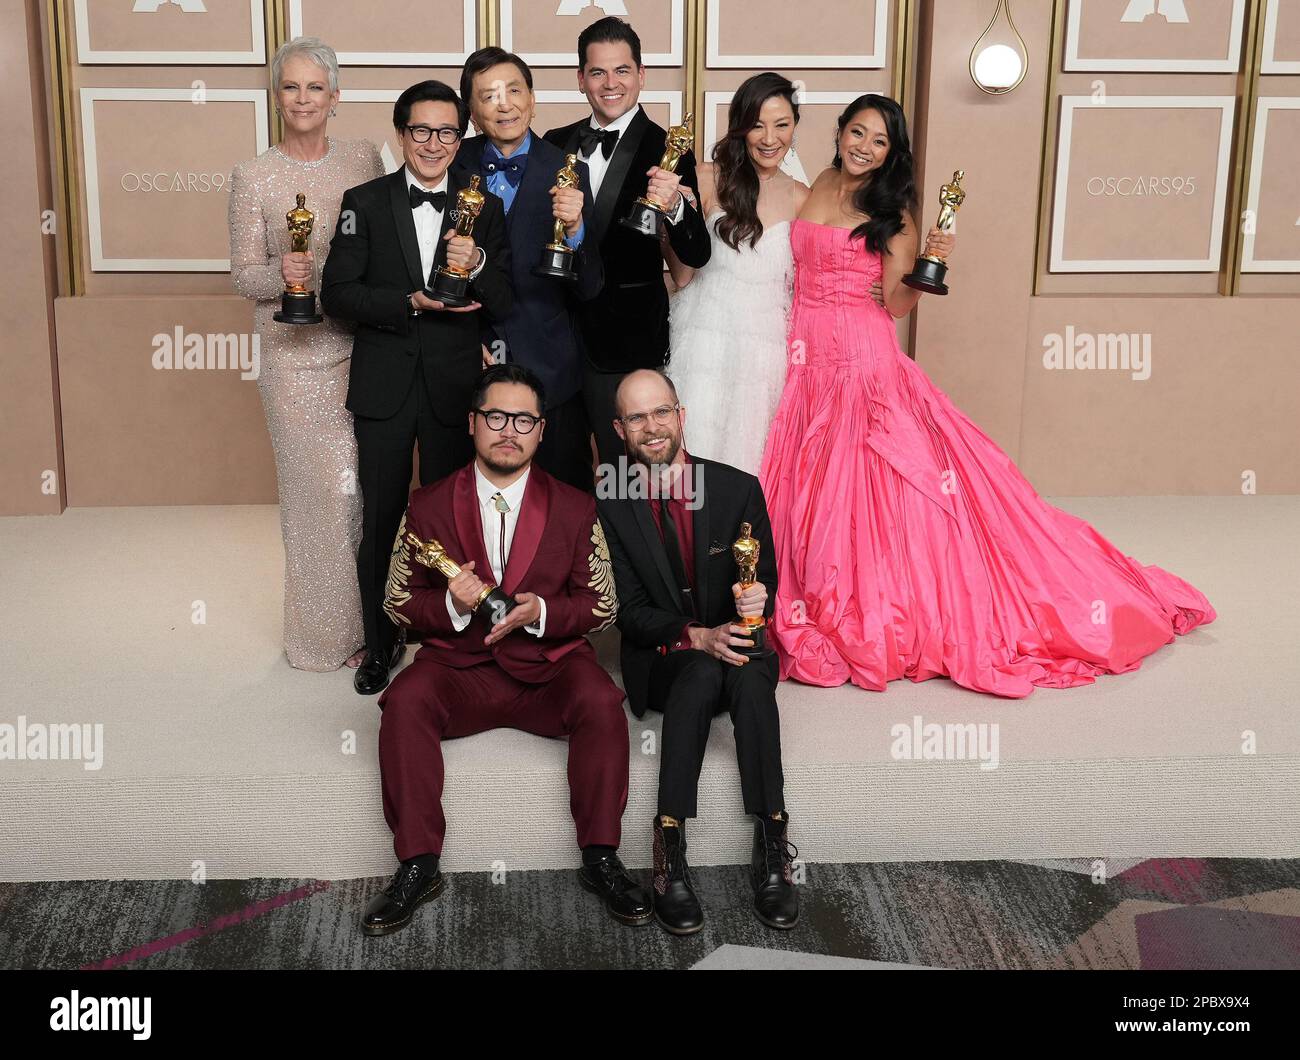 Los Angeles, USA. 12th Mar, 2023. (Top L-R) The cast and crew of 'Everything Everywhere All at Once' Jamie Lee Curtis, Ke Huy Quan, James Hong, Jonathan Wang, Michelle Yeoh, Stephanie Hsu, (Bottom L-R) Daniel Kwan and Daniel Scheinert pose with their Oscar trophies in the press room at the The 95th Academy Awards held by the Academy of Motion Picture Arts and Sciences at the Dolby Theatre in Los Angeles, CA on March 12, 2023. (Photo by Sthanlee B. Mirador/Sipa USA) Credit: Sipa USA/Alamy Live News Stock Photo